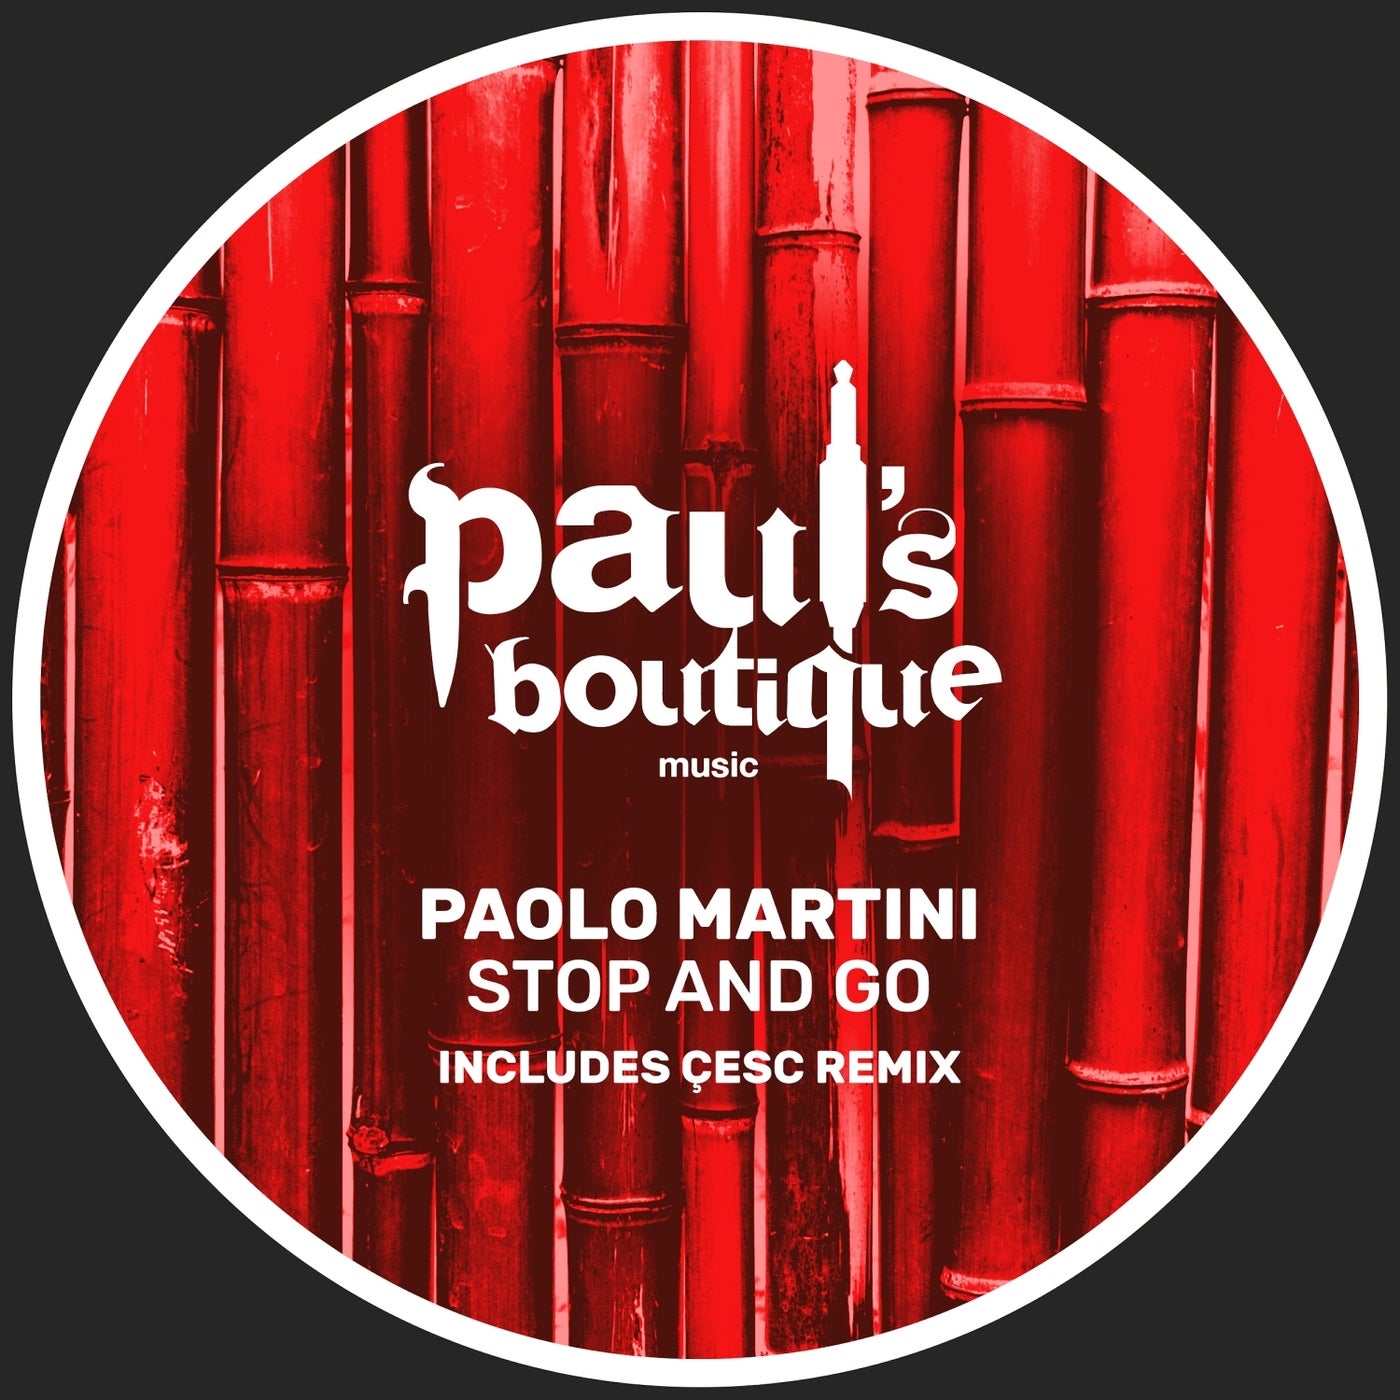 Paolo Martini – Stop and Go [PSB135]